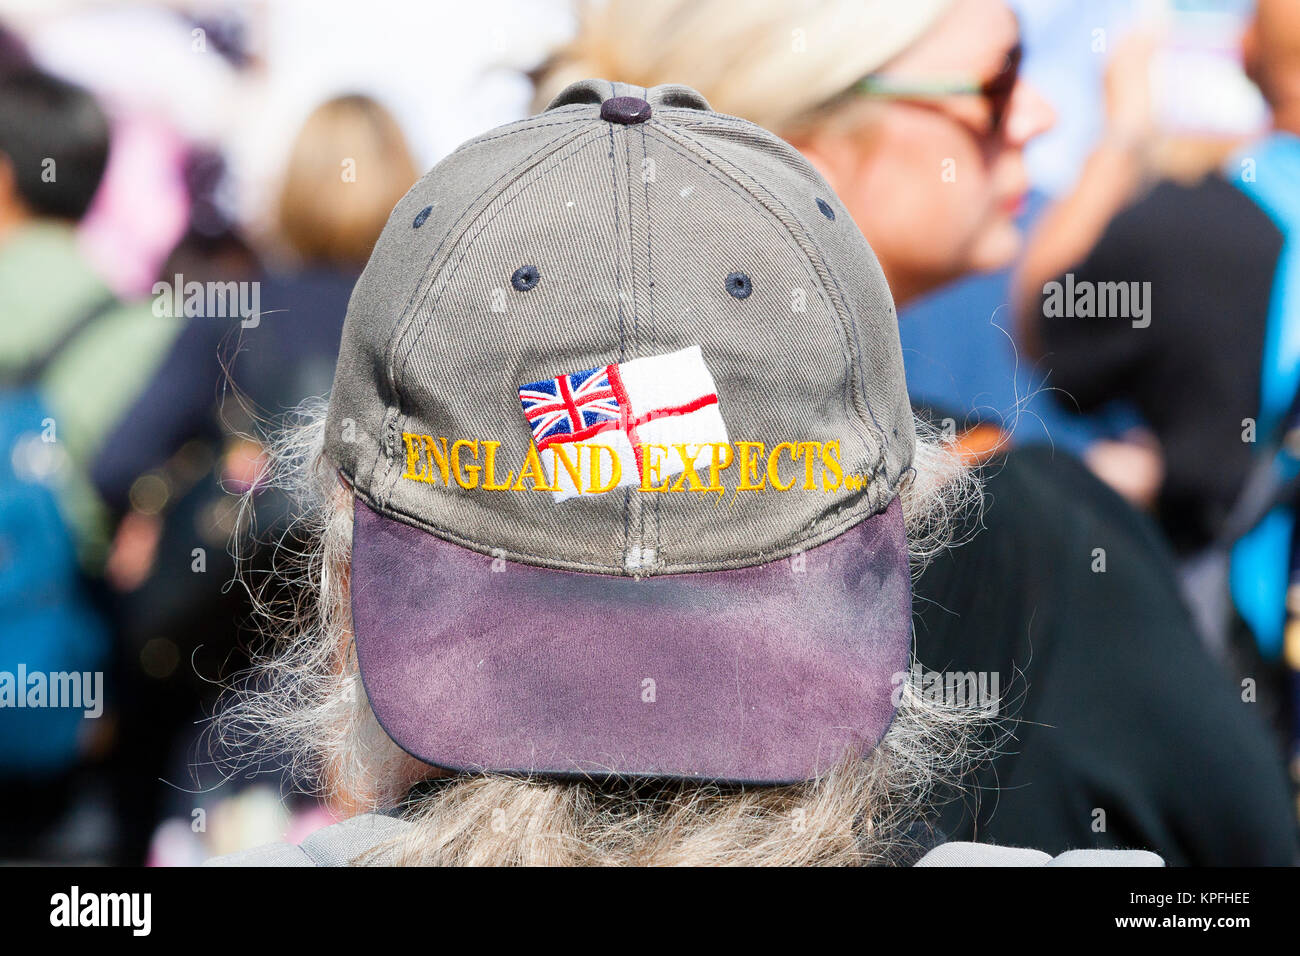 Kensington Palace, London, UK. A man in an 'England Expects' hat at the south gate of Kensington Palace on the 20th anniversary of the death of Diana  Stock Photo